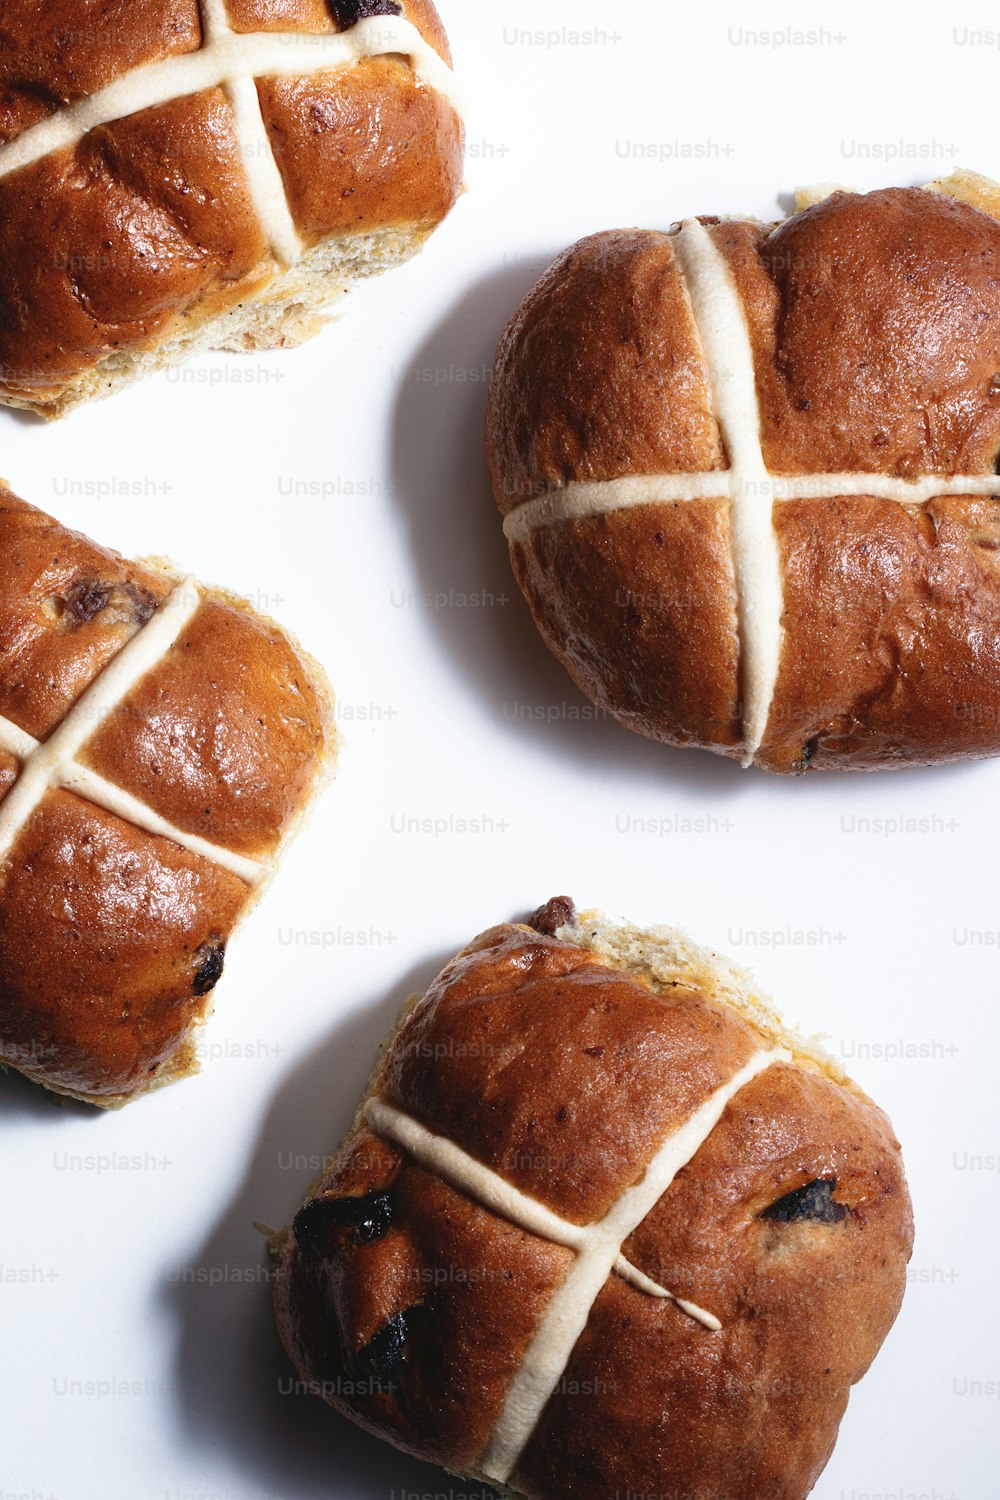 three hot cross buns on a white surface